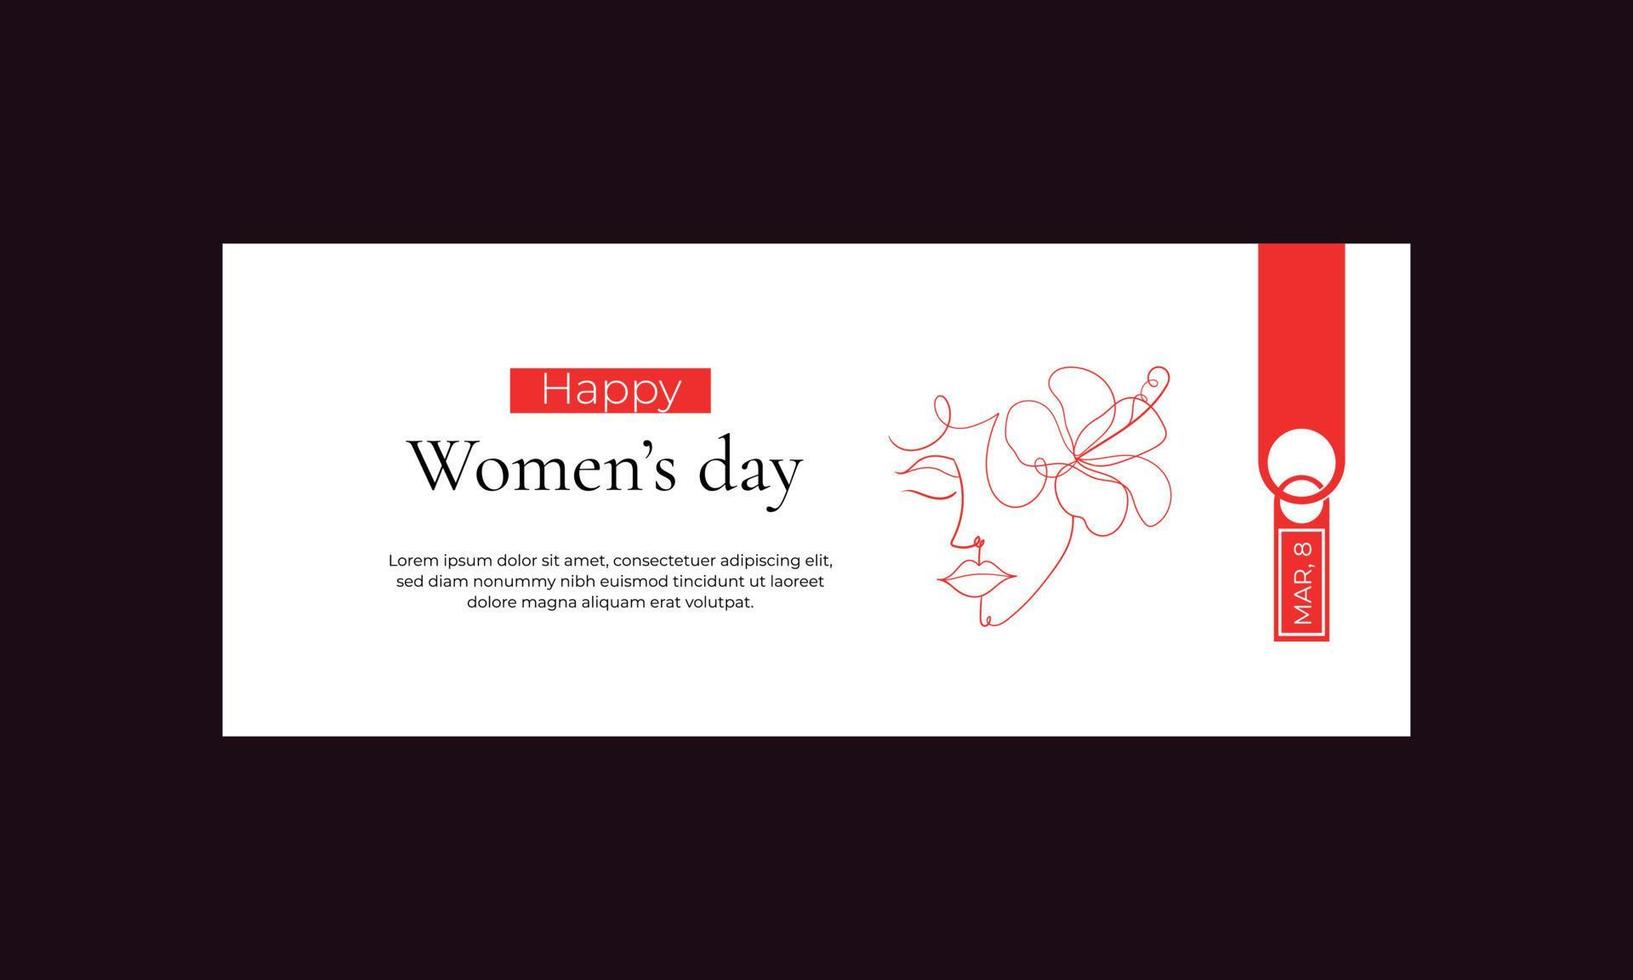 International women's day social media post creative and new. vector